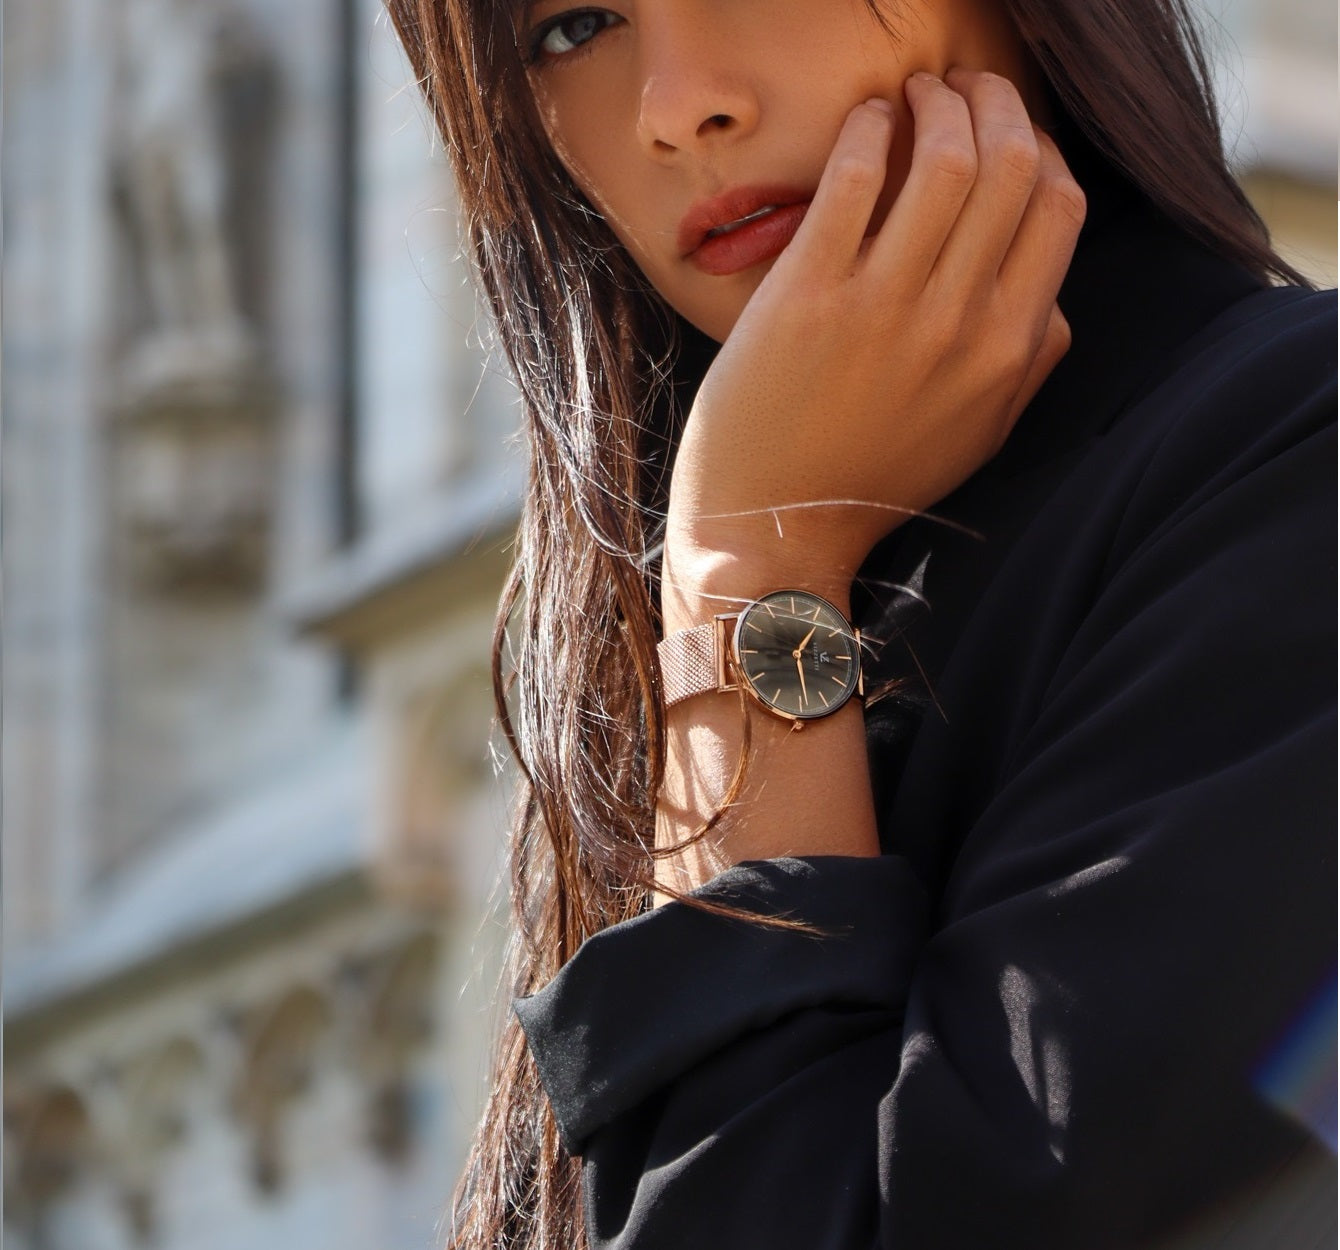 A female model strikes a pose in Italy, showcasing her Vizzetti watch on her hand.